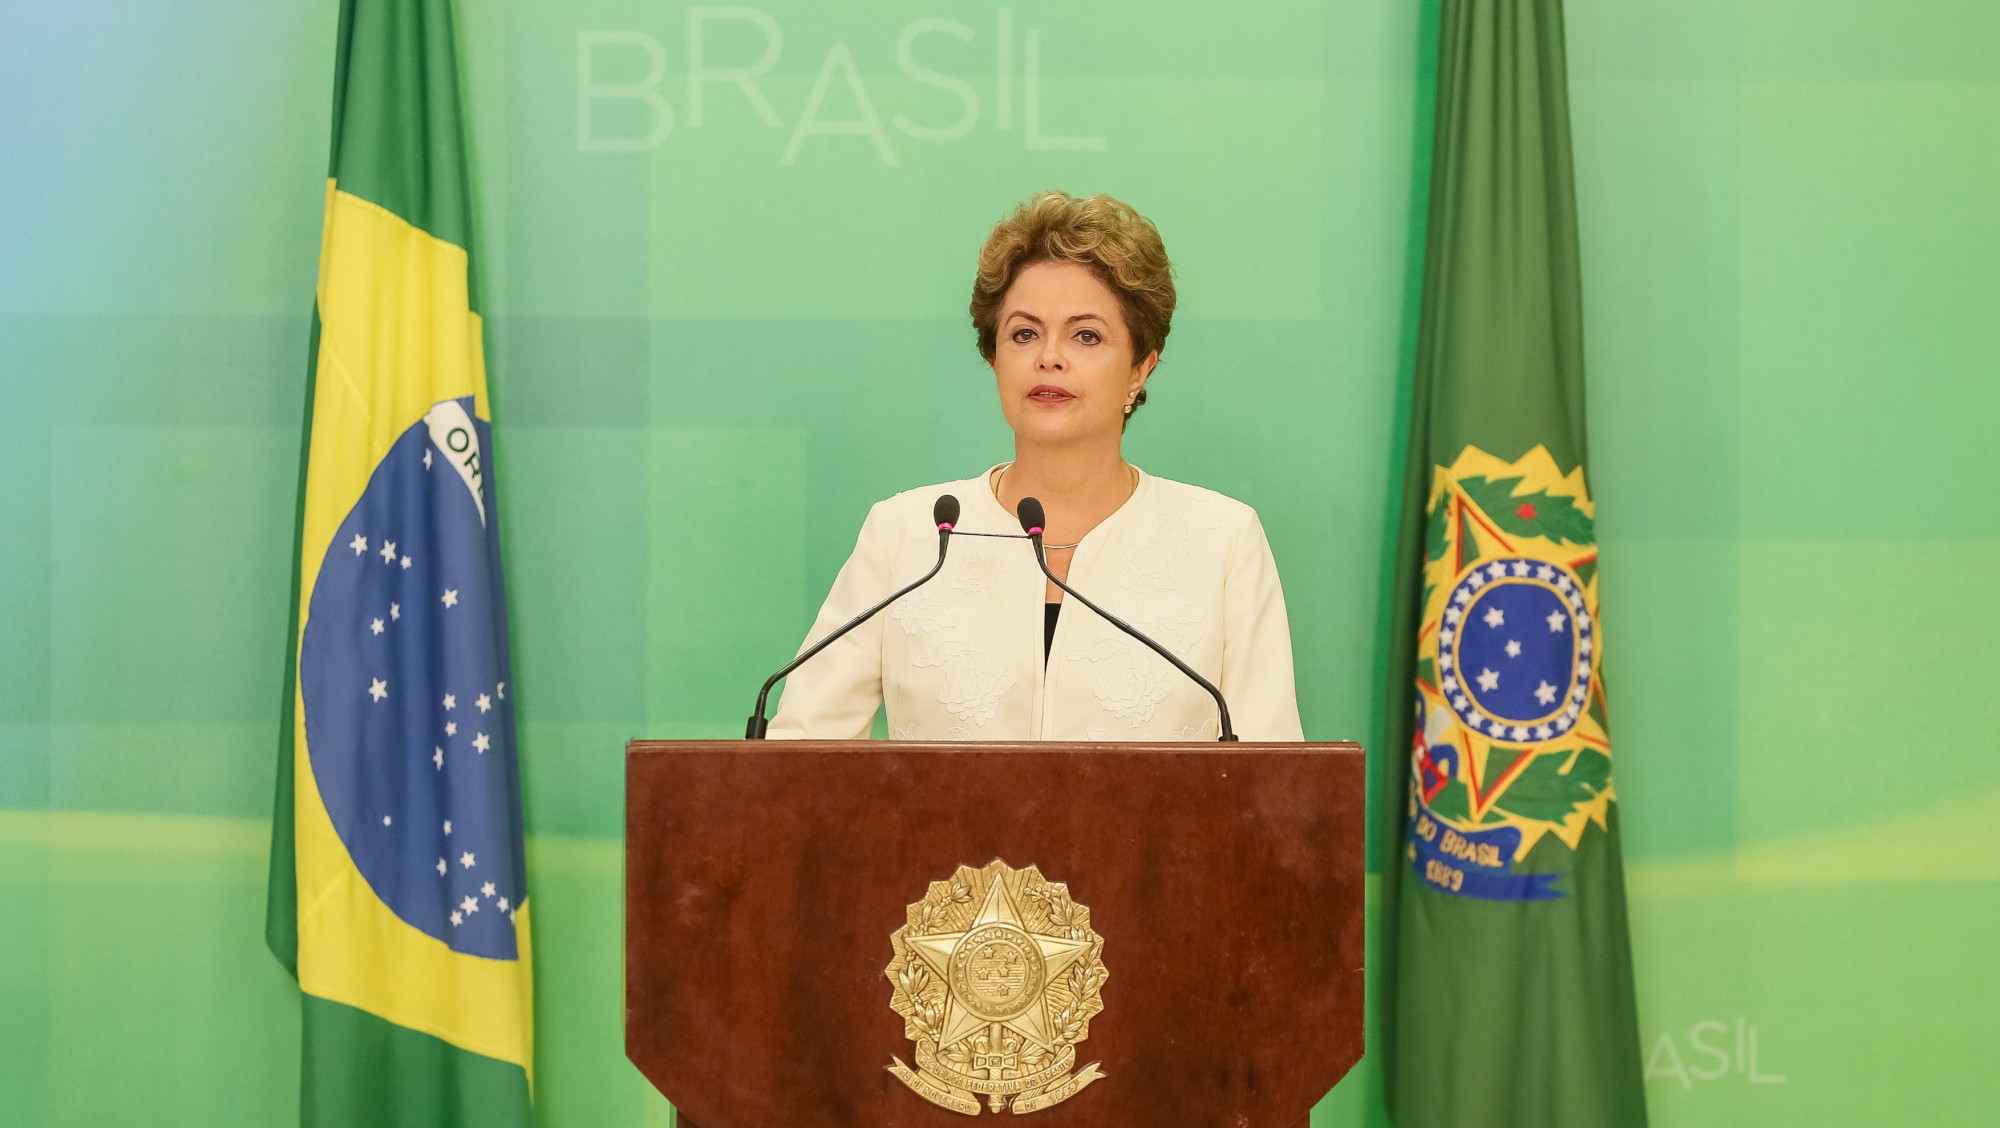 Brazil's President Dilma Rousseff addresses the nation after announcement of impeachment proceedings will be opened,